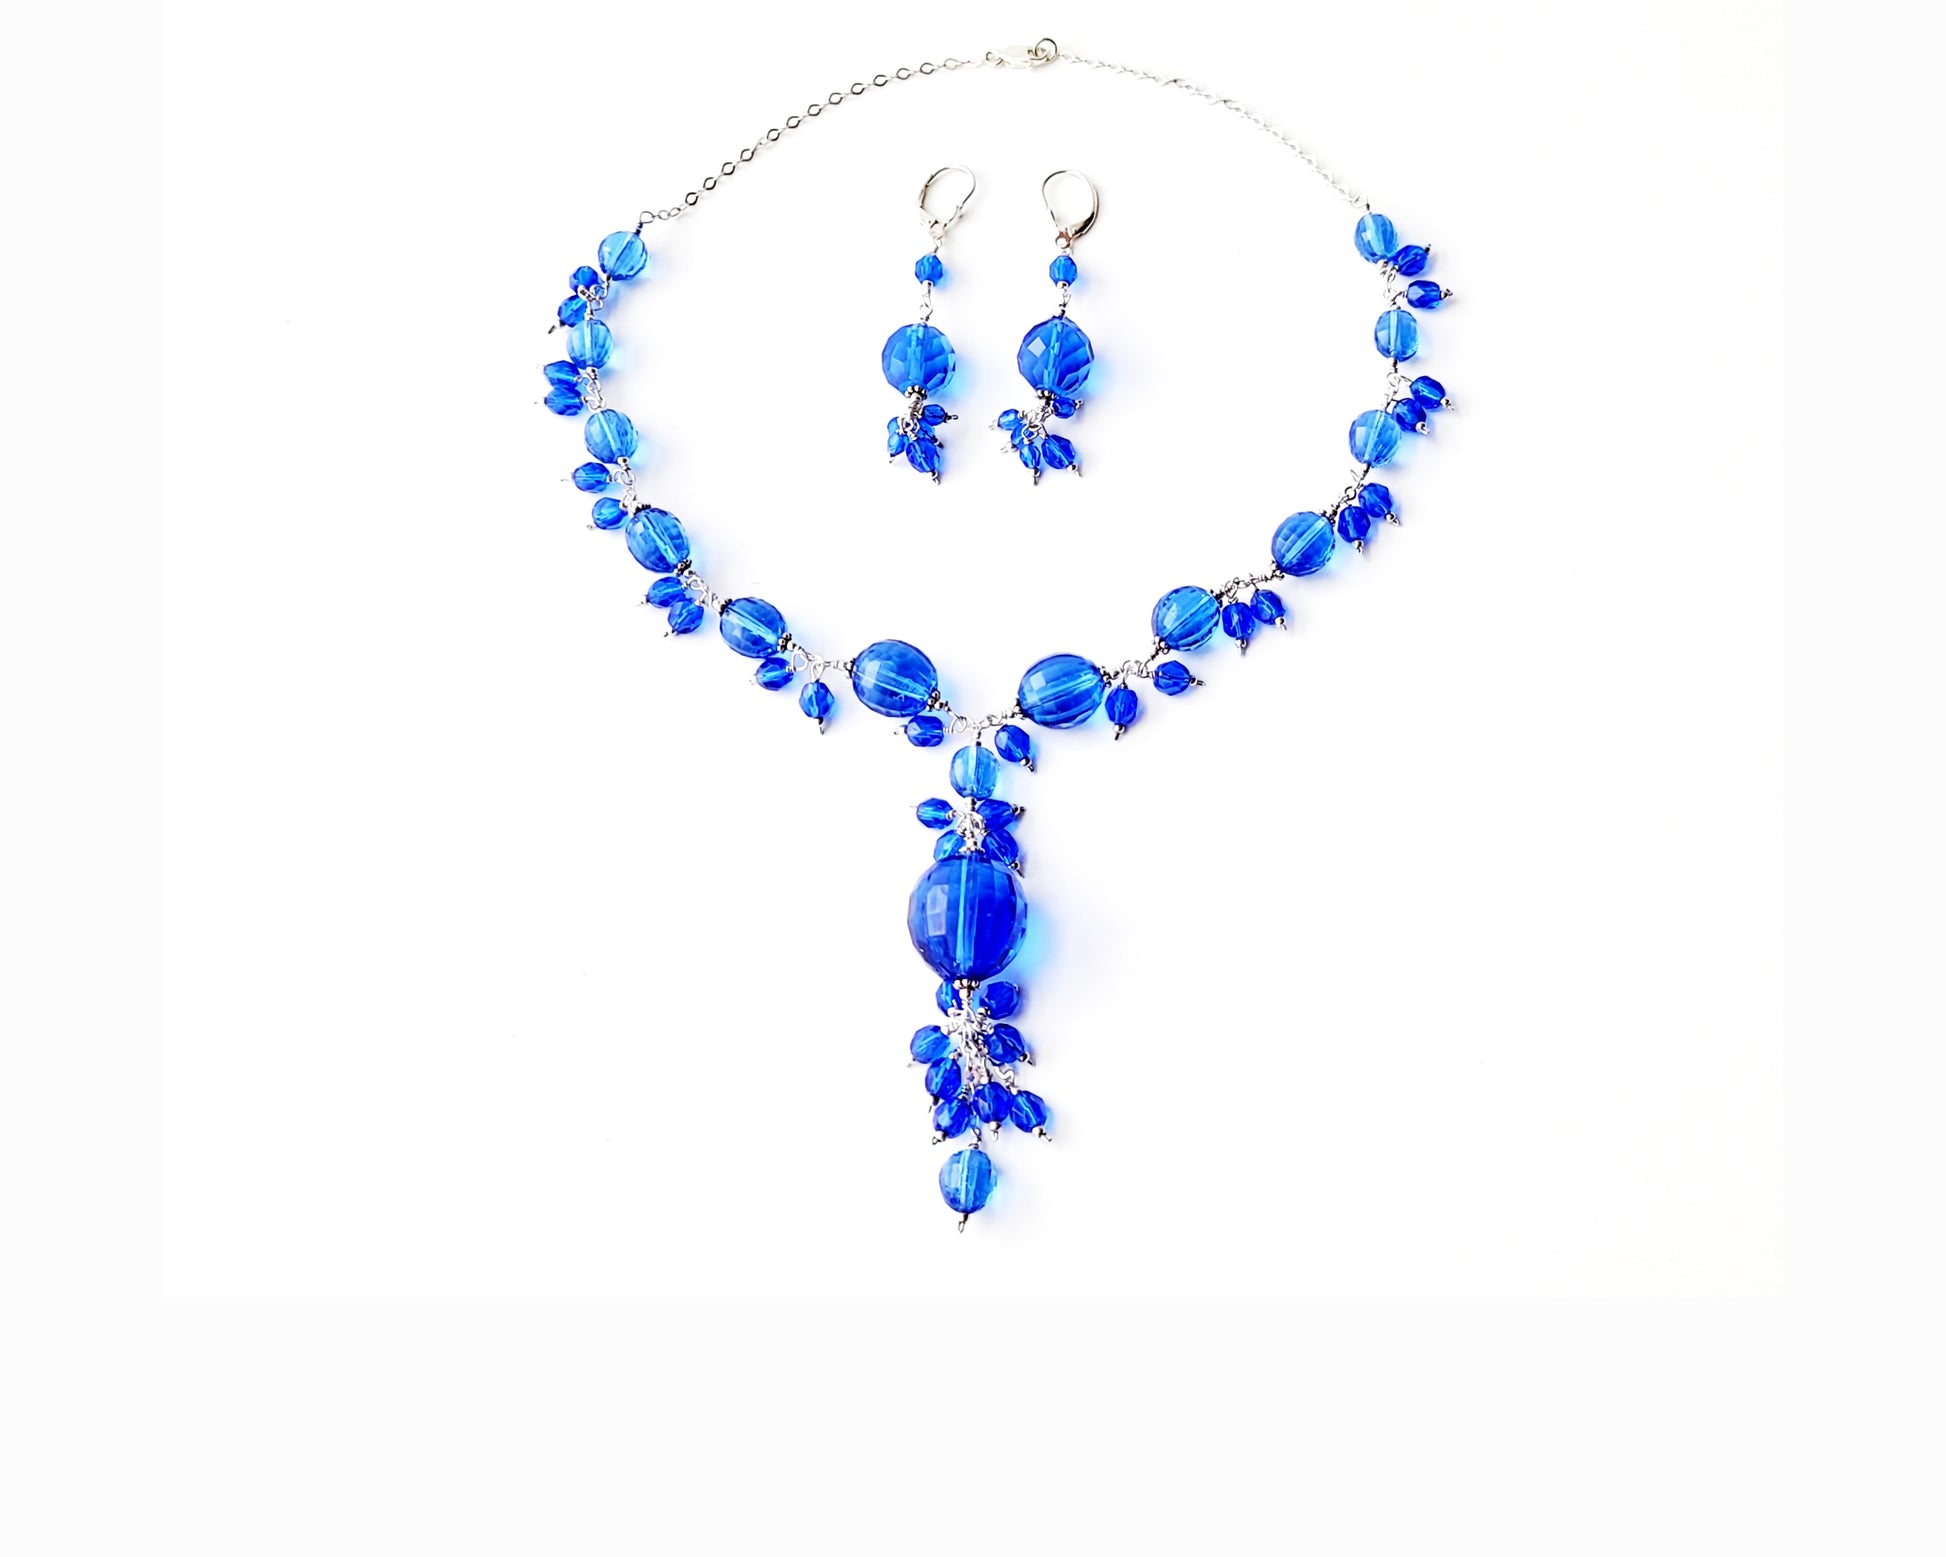 Twilight Blue Crystal Passion Necklace and Earring Set, Cluster Y Shape Blue Crystal Necklace and Long earrings, Sterling Silver